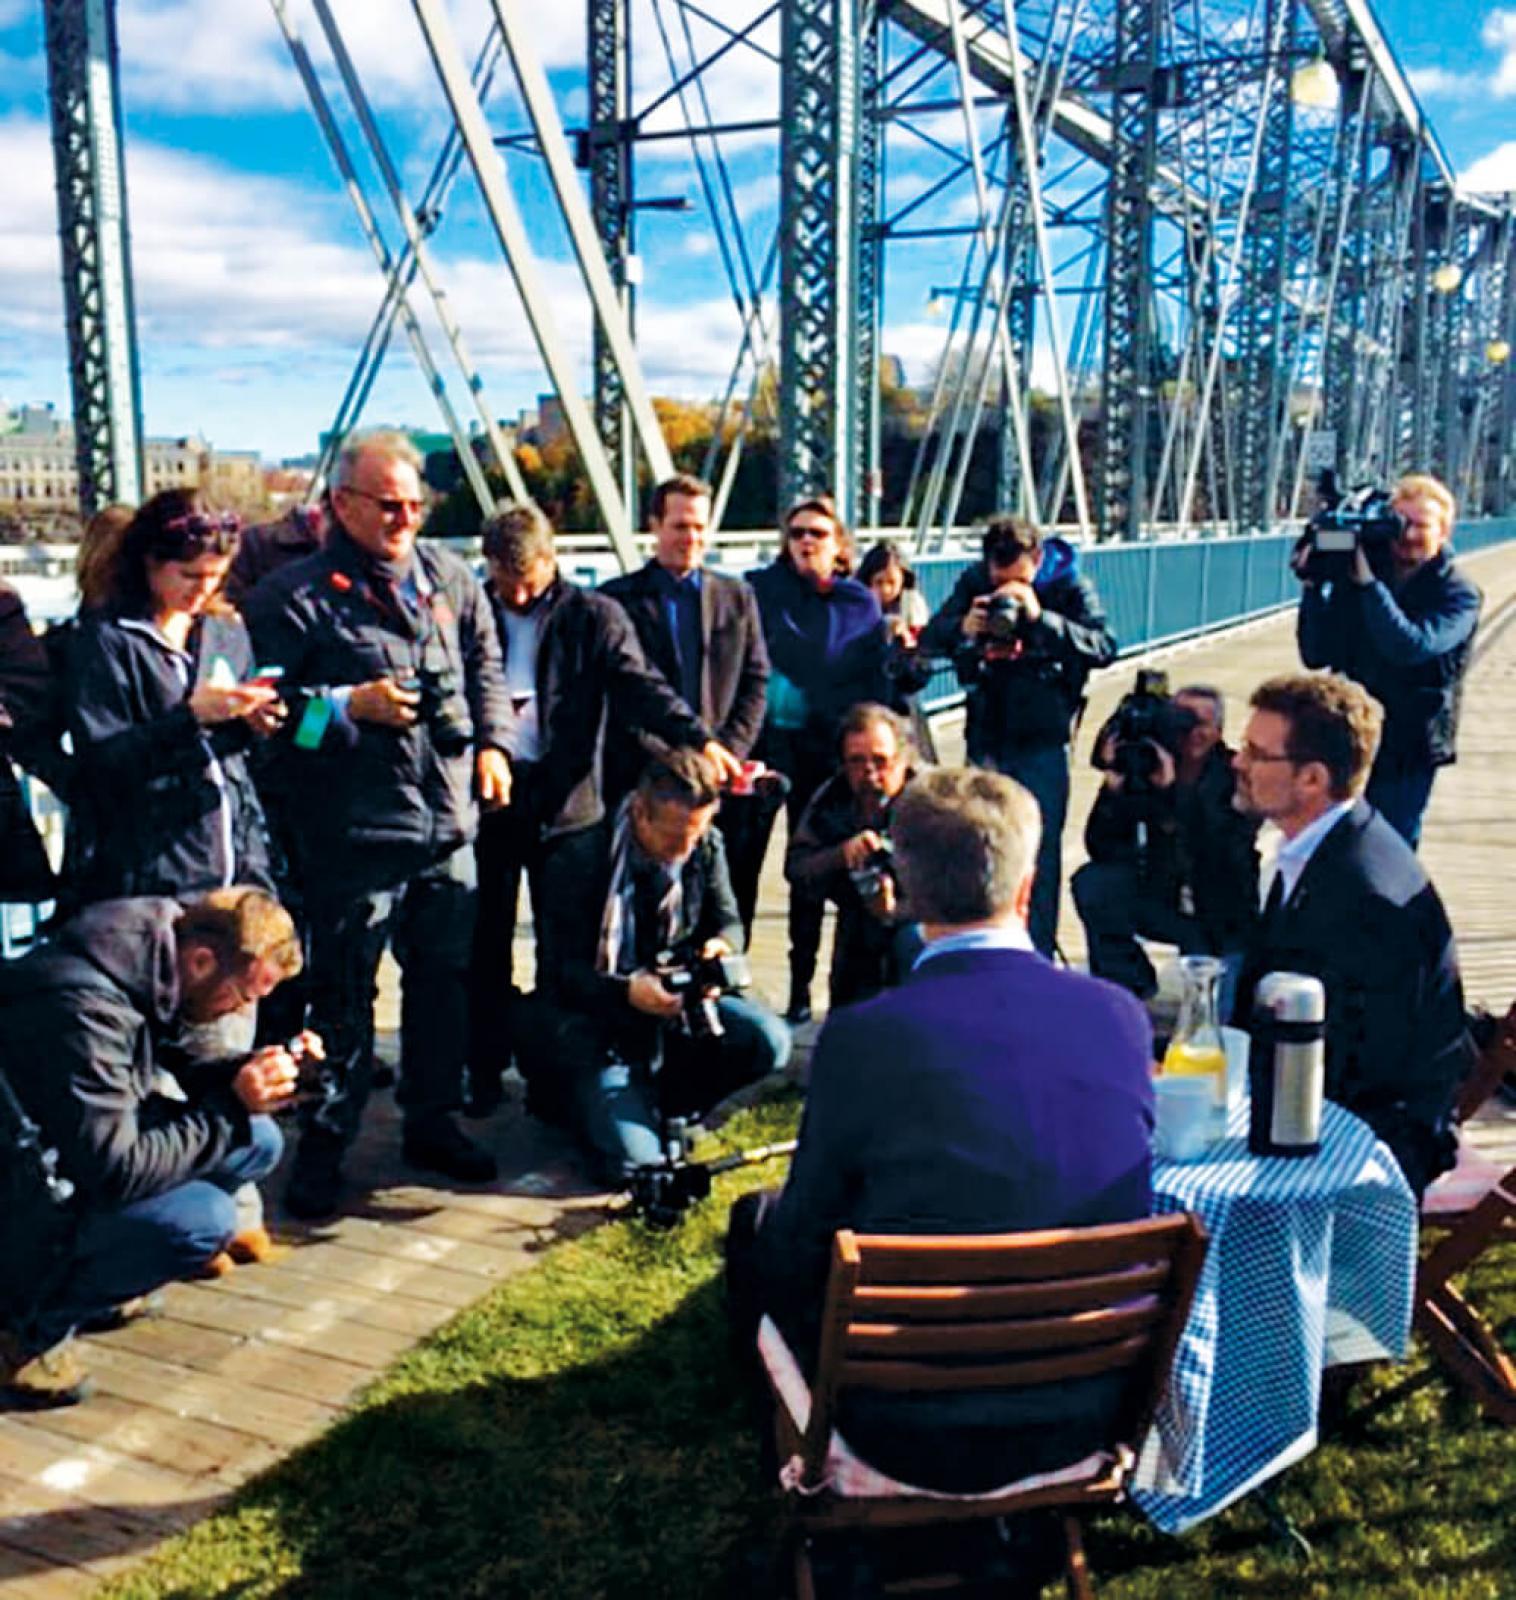 Picnic on the Bridge, complete with sod, was announced  at a media event.